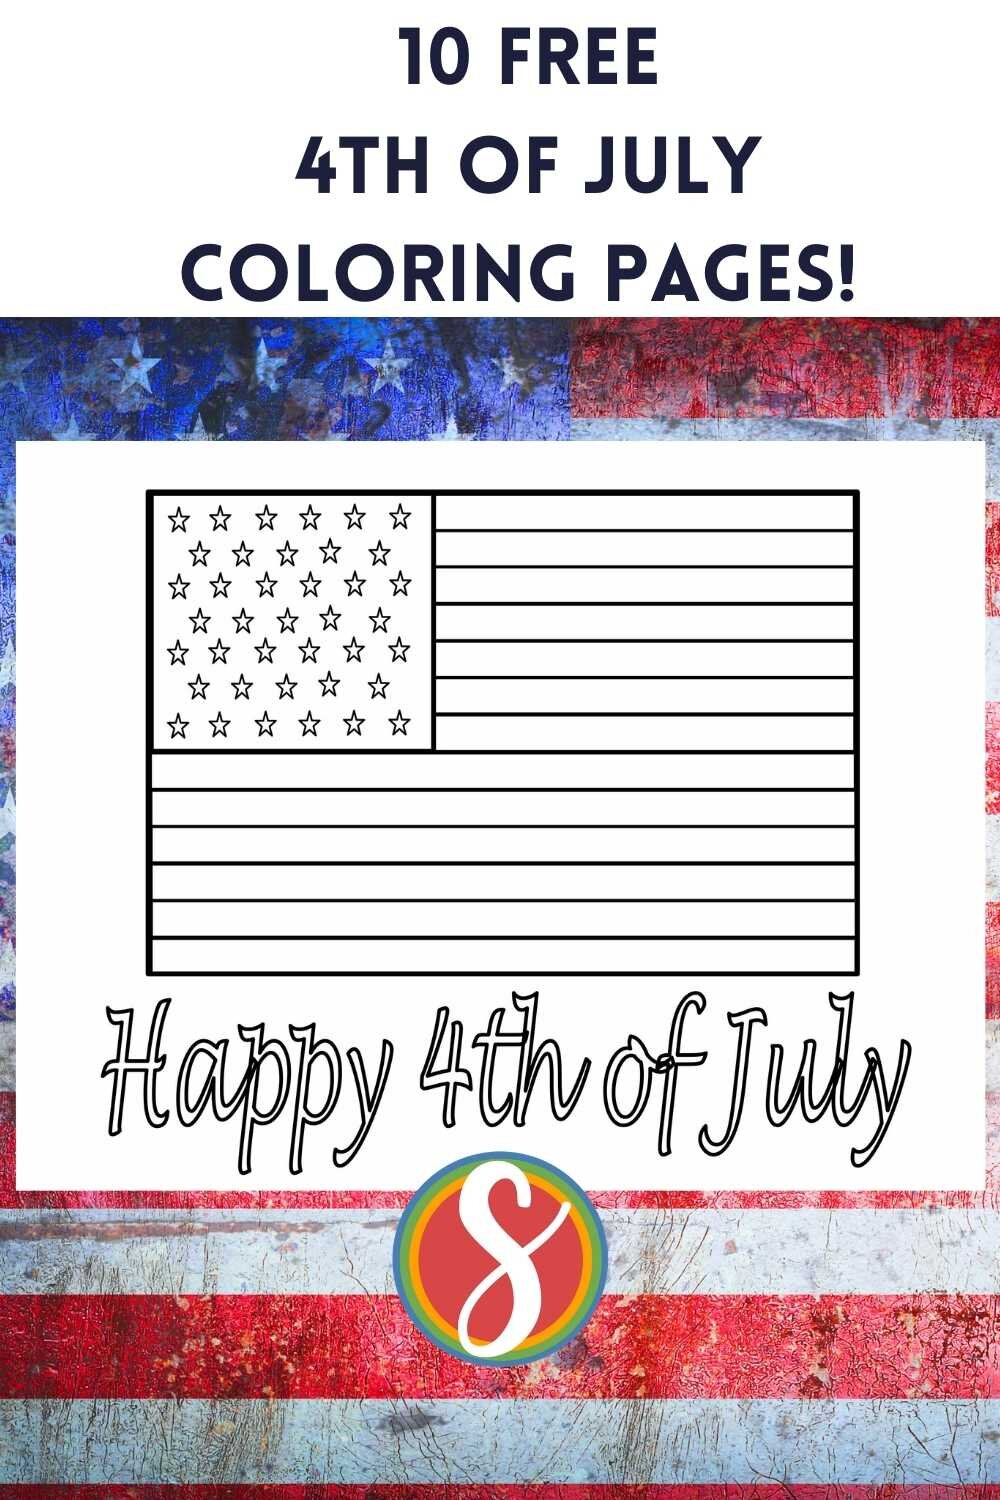 4th of July coloring page with flag